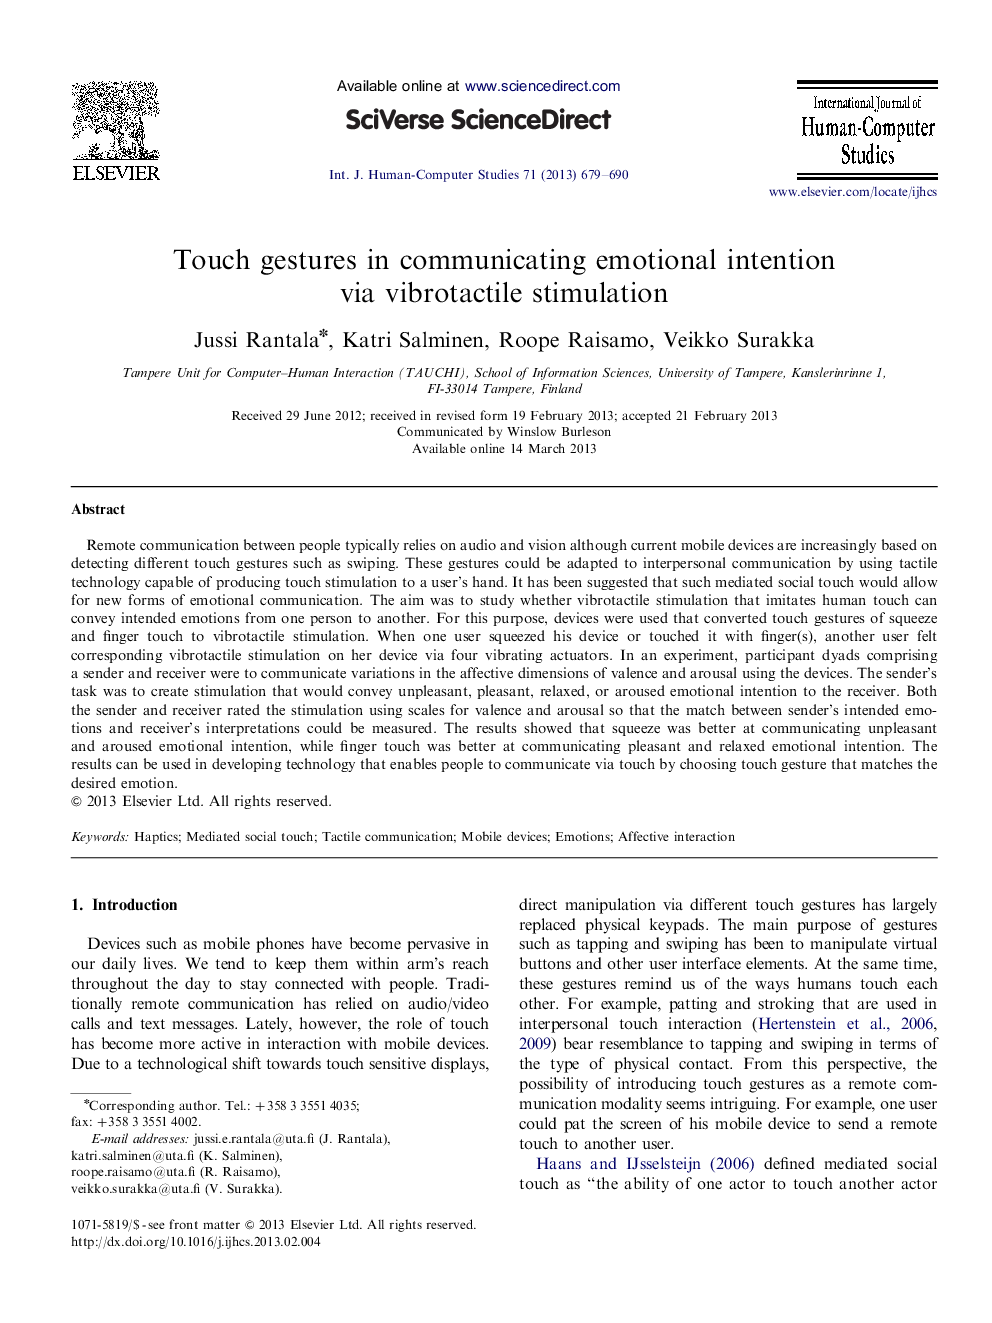 Touch gestures in communicating emotional intention via vibrotactile stimulation